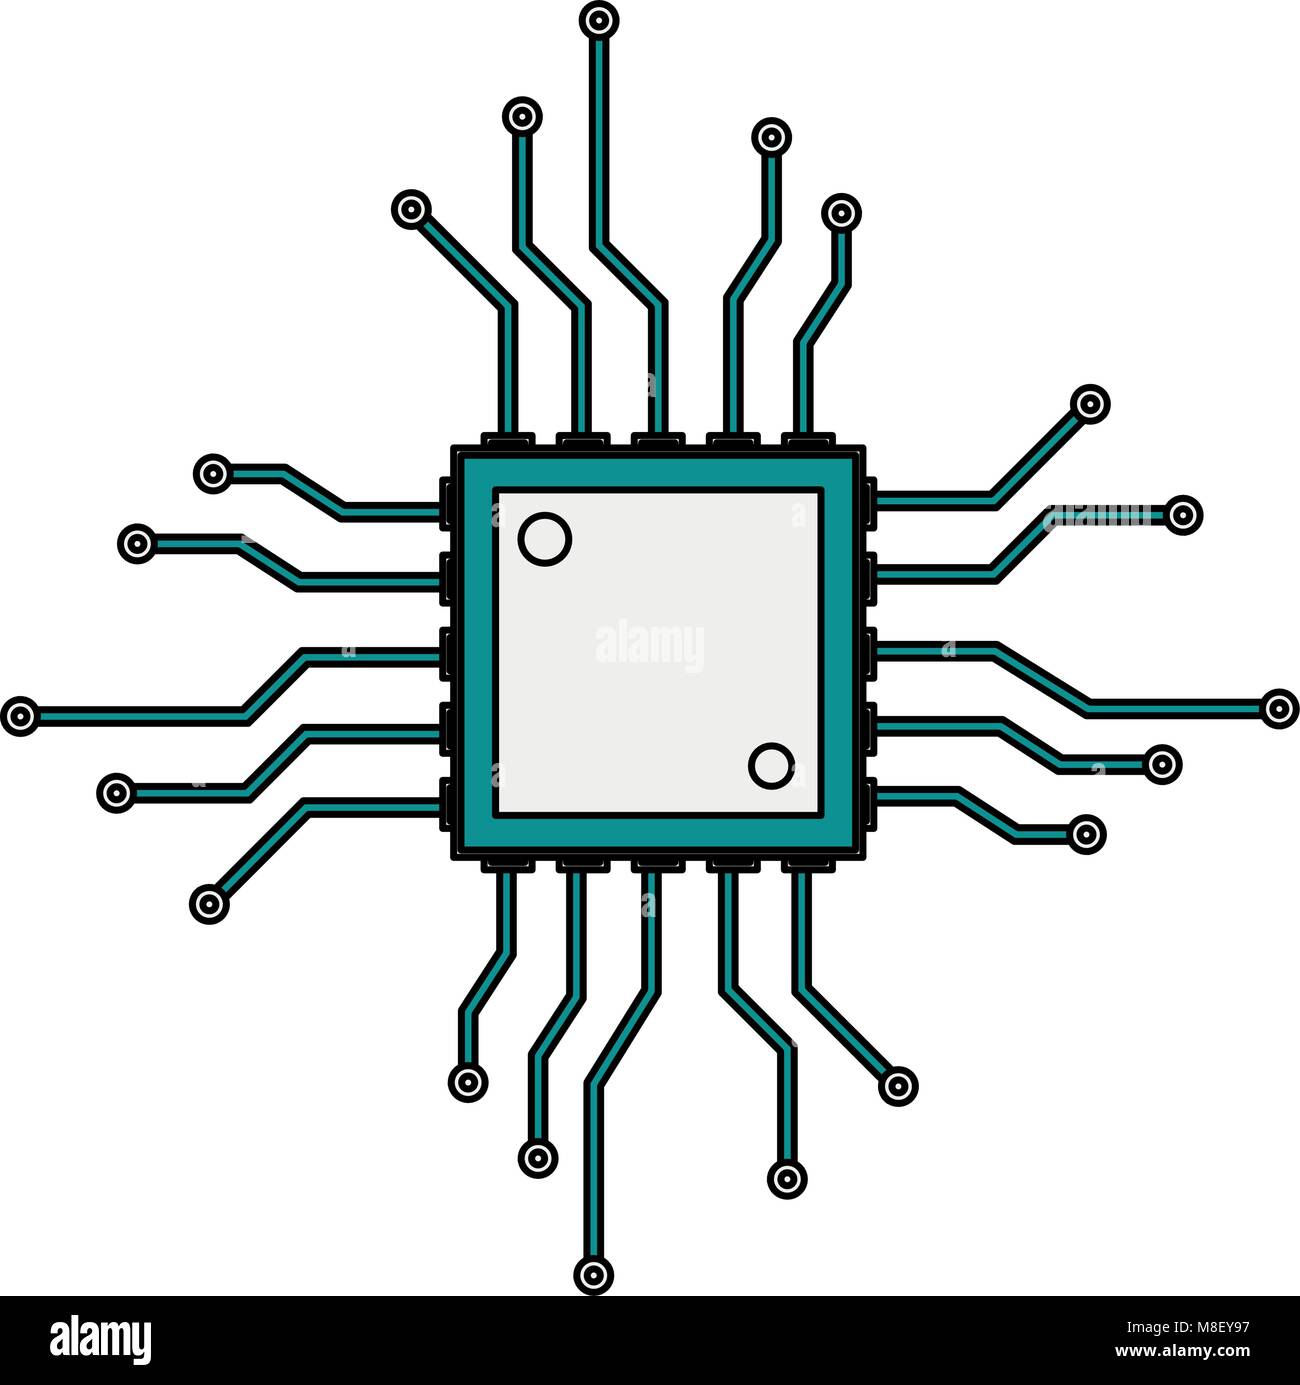 Microchip technology isolated vector illustration graphic design Stock Vector